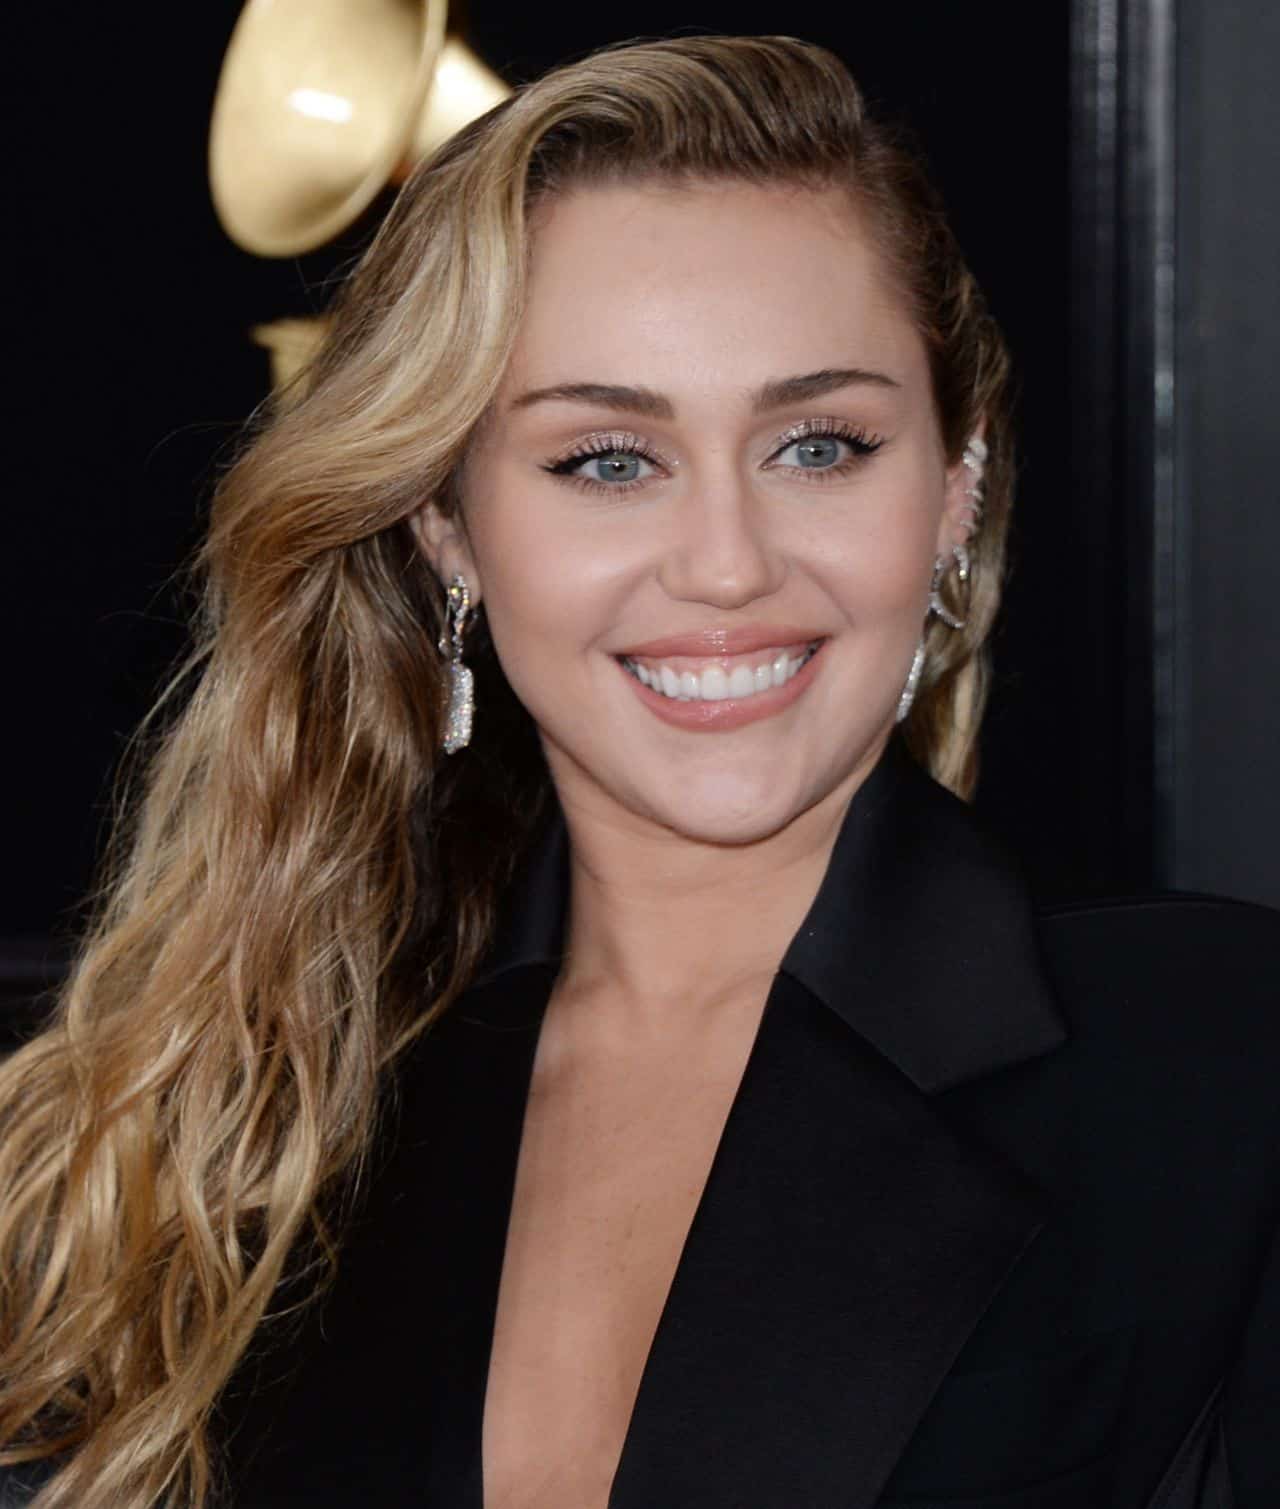 Miley Cyrus Turns Heads at the Grammy Awards with Her Chic Low-Cut Blazer